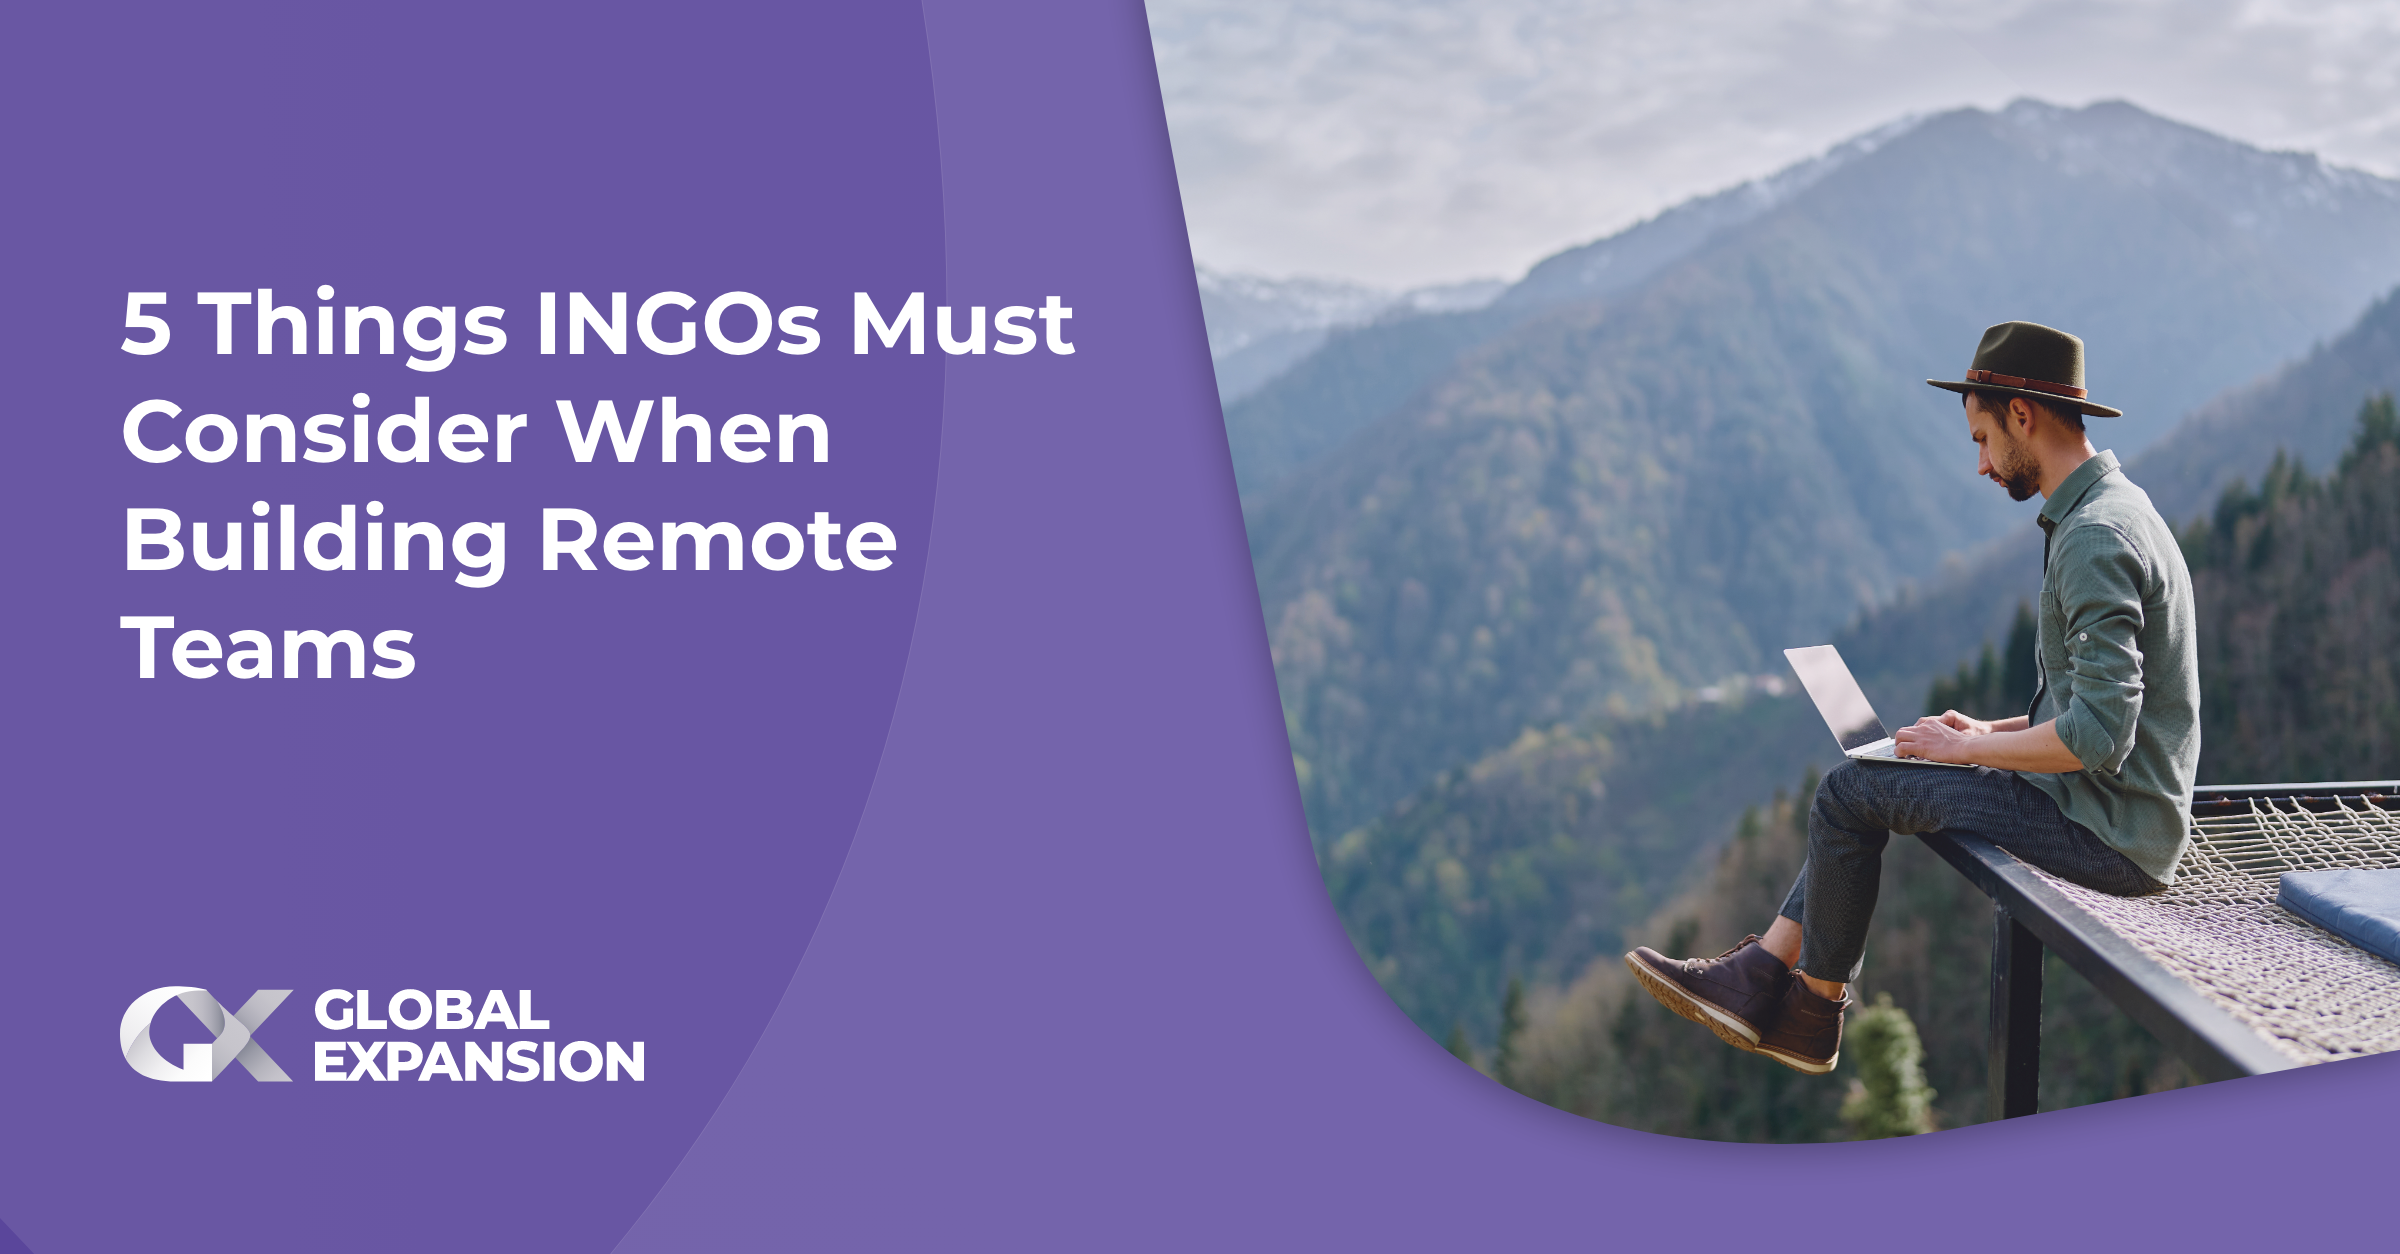 5 Things INGOs Must Consider When Building Remote Teams